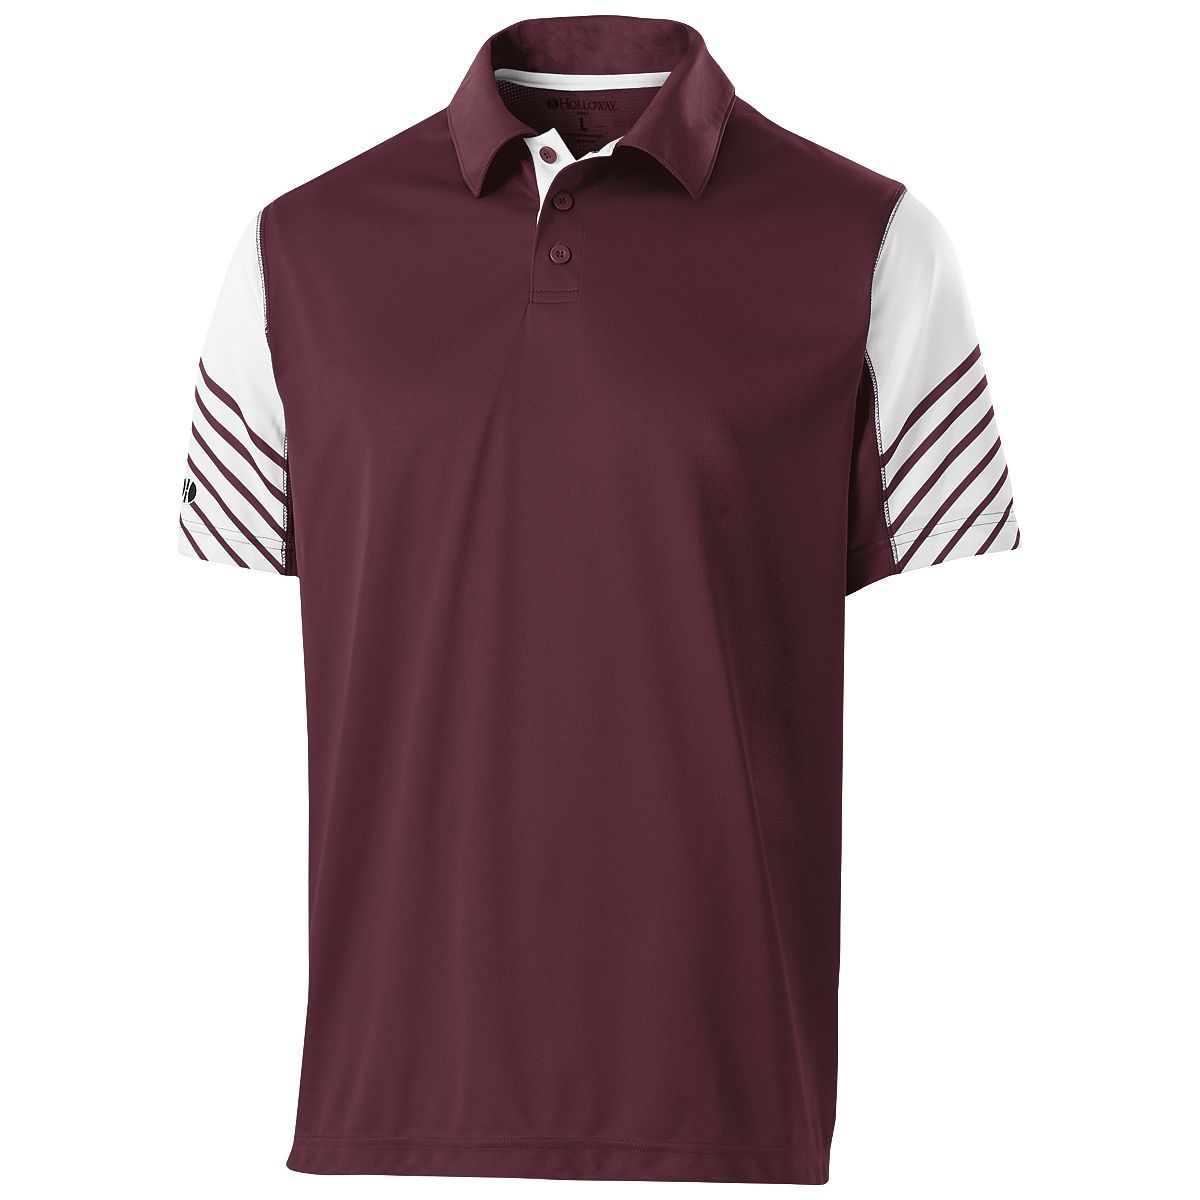 Holloway Arc Polo in Maroon/White  -Part of the Adult, Adult-Polos, Polos, Holloway, Shirts product lines at KanaleyCreations.com